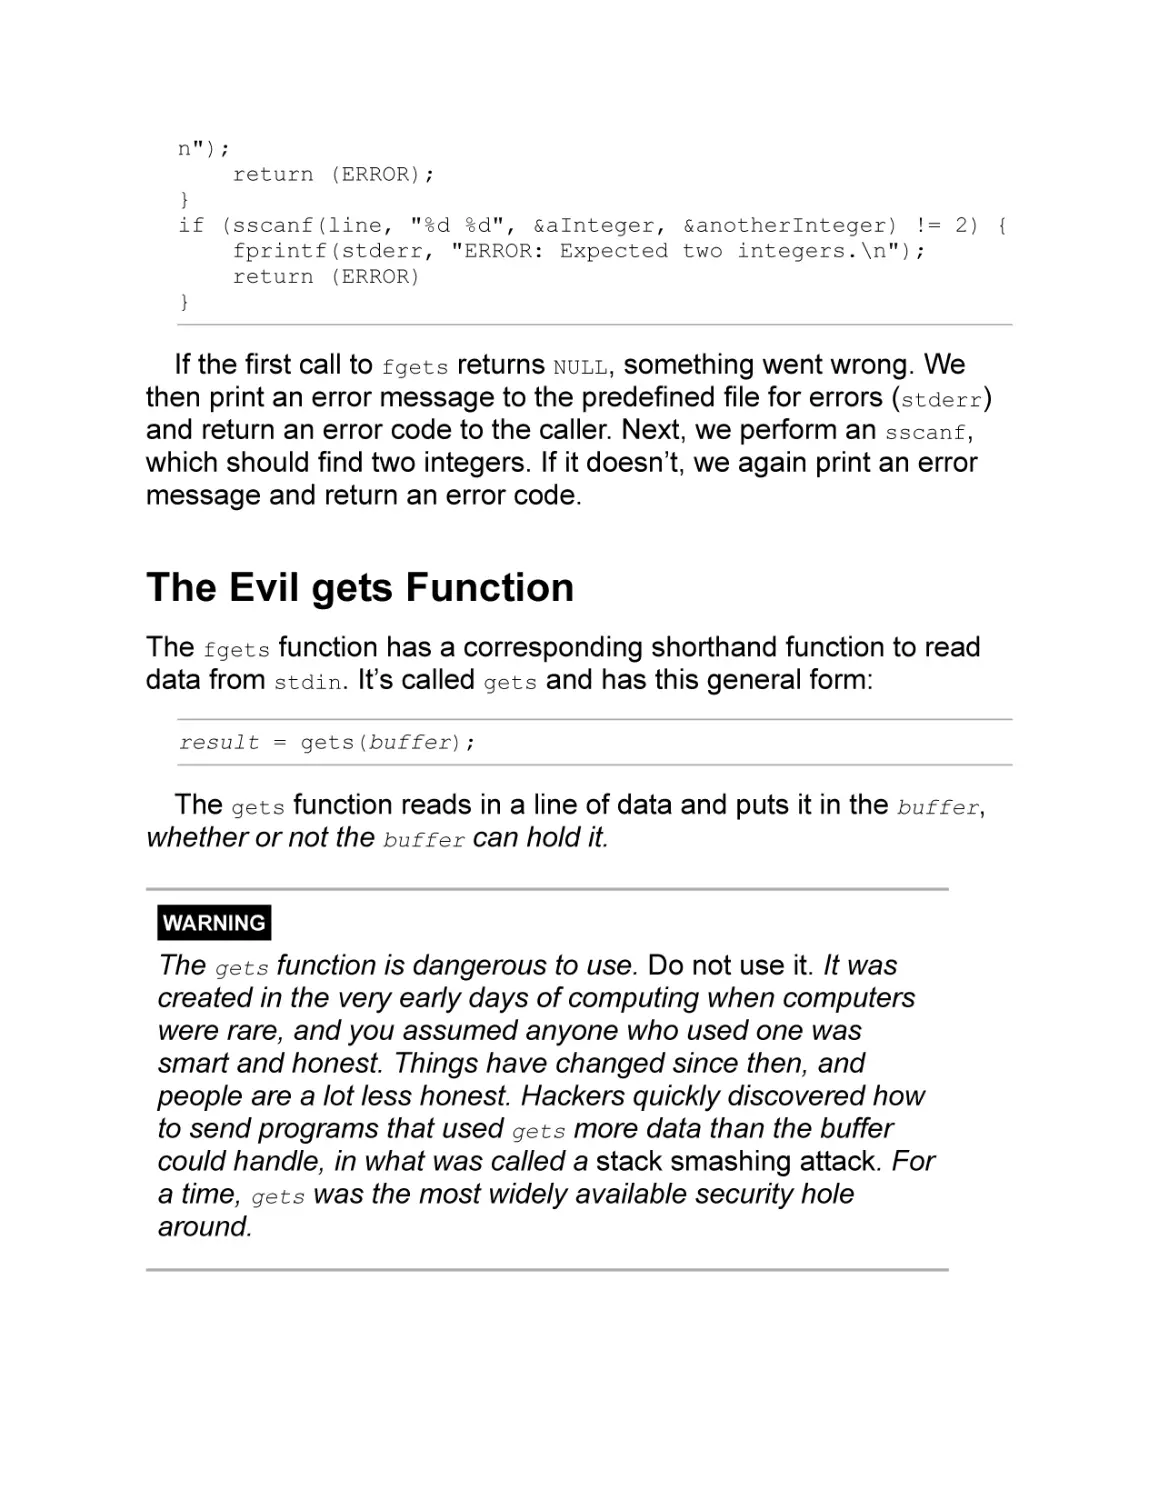 The Evil gets Function